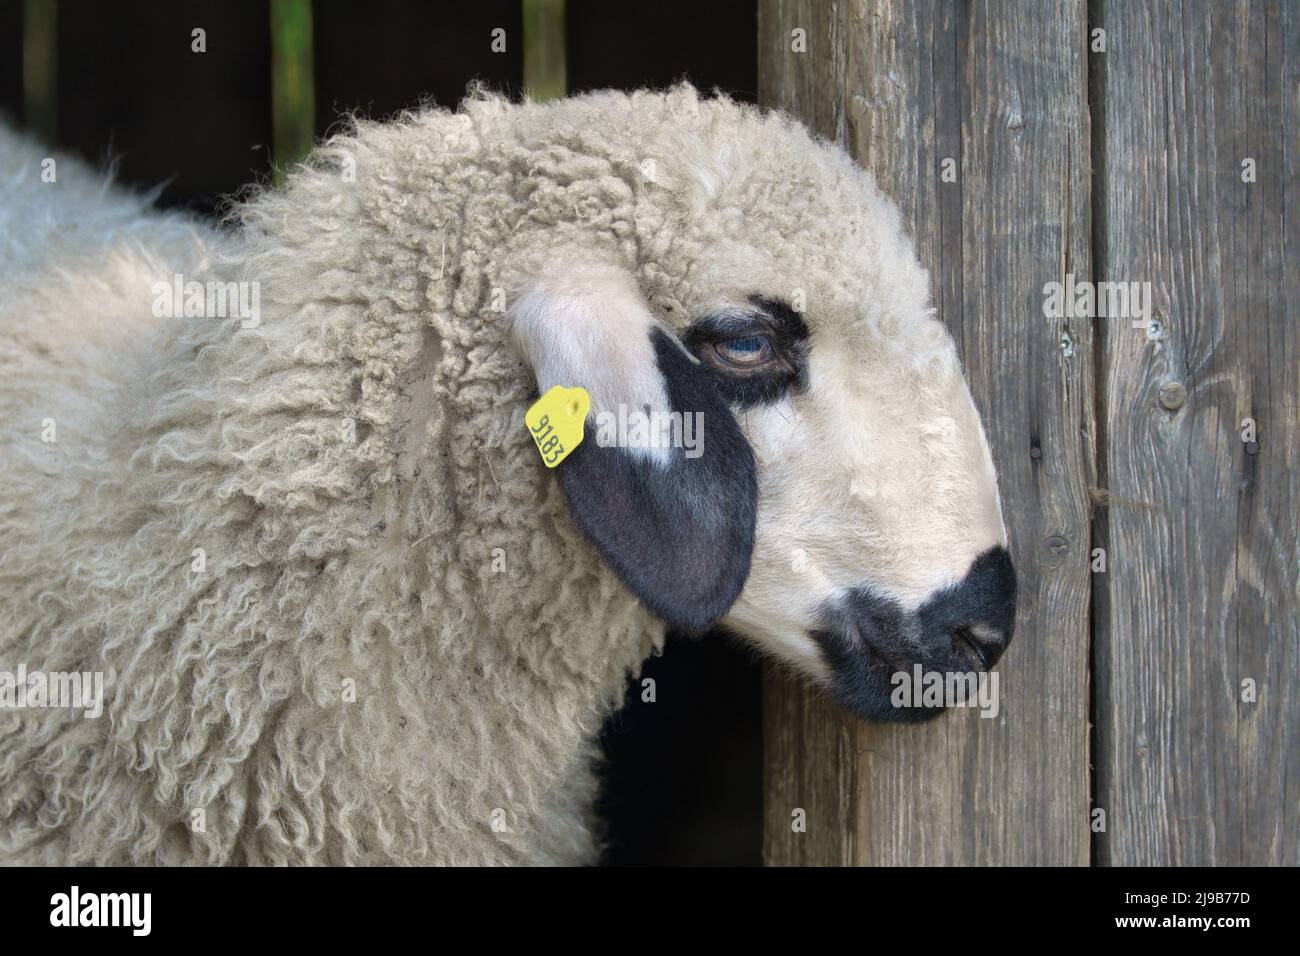 Portrait of a cute white sheep with black markings, looking out of the stable. Stock Photo